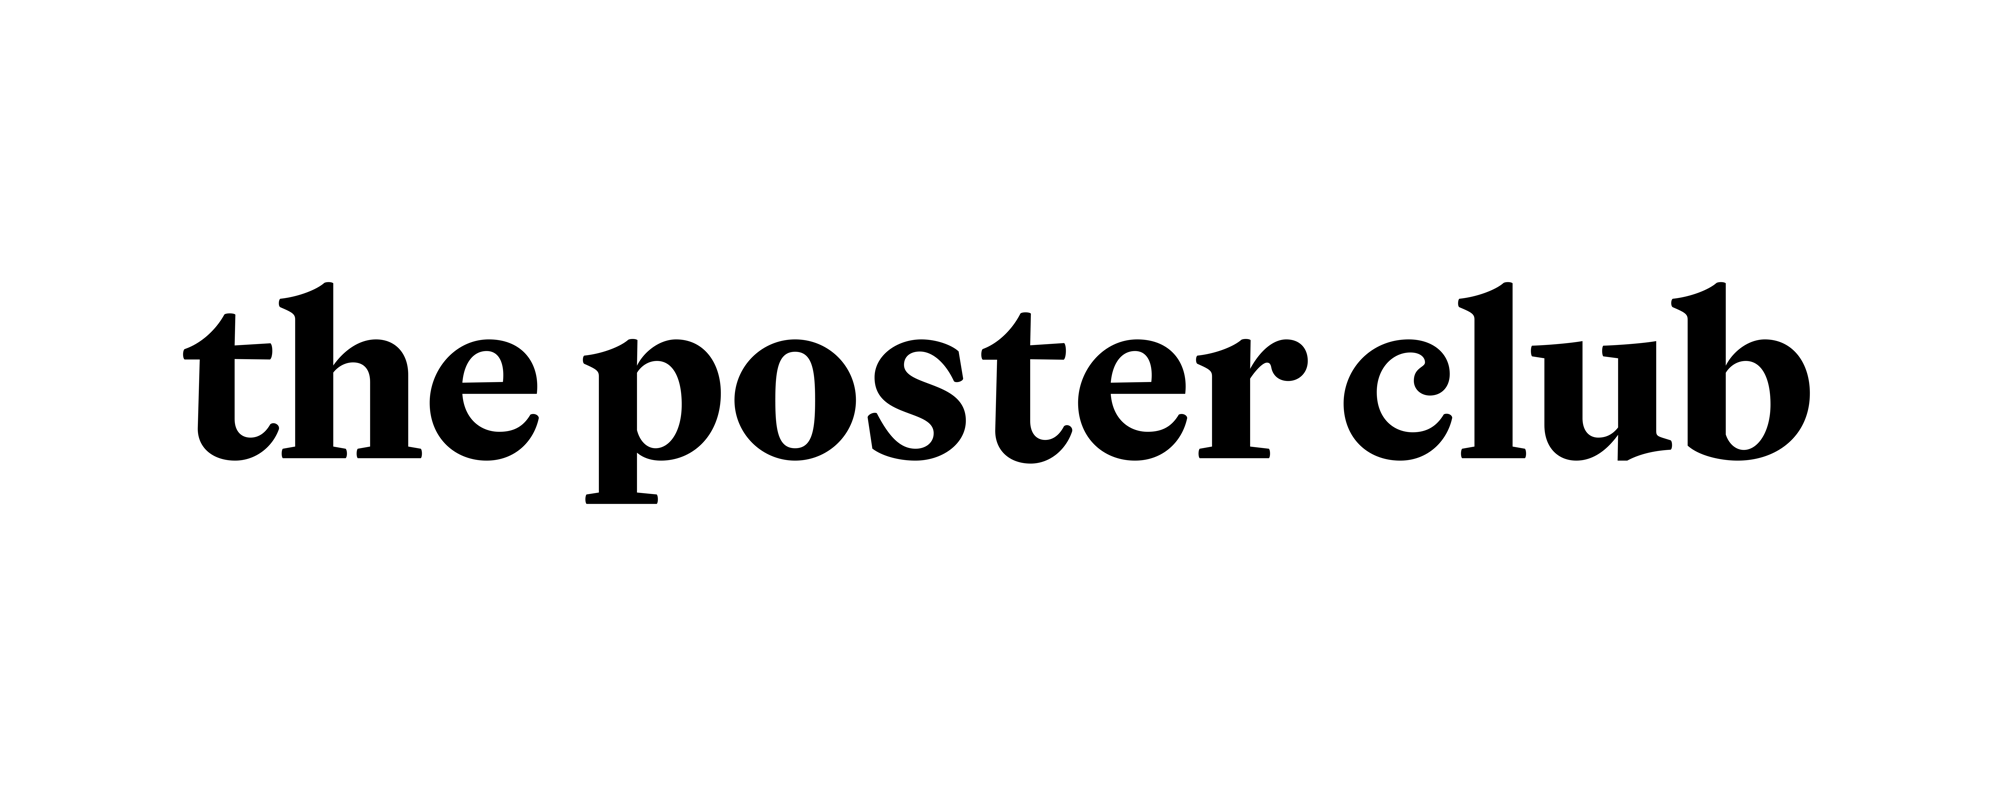 the poster club